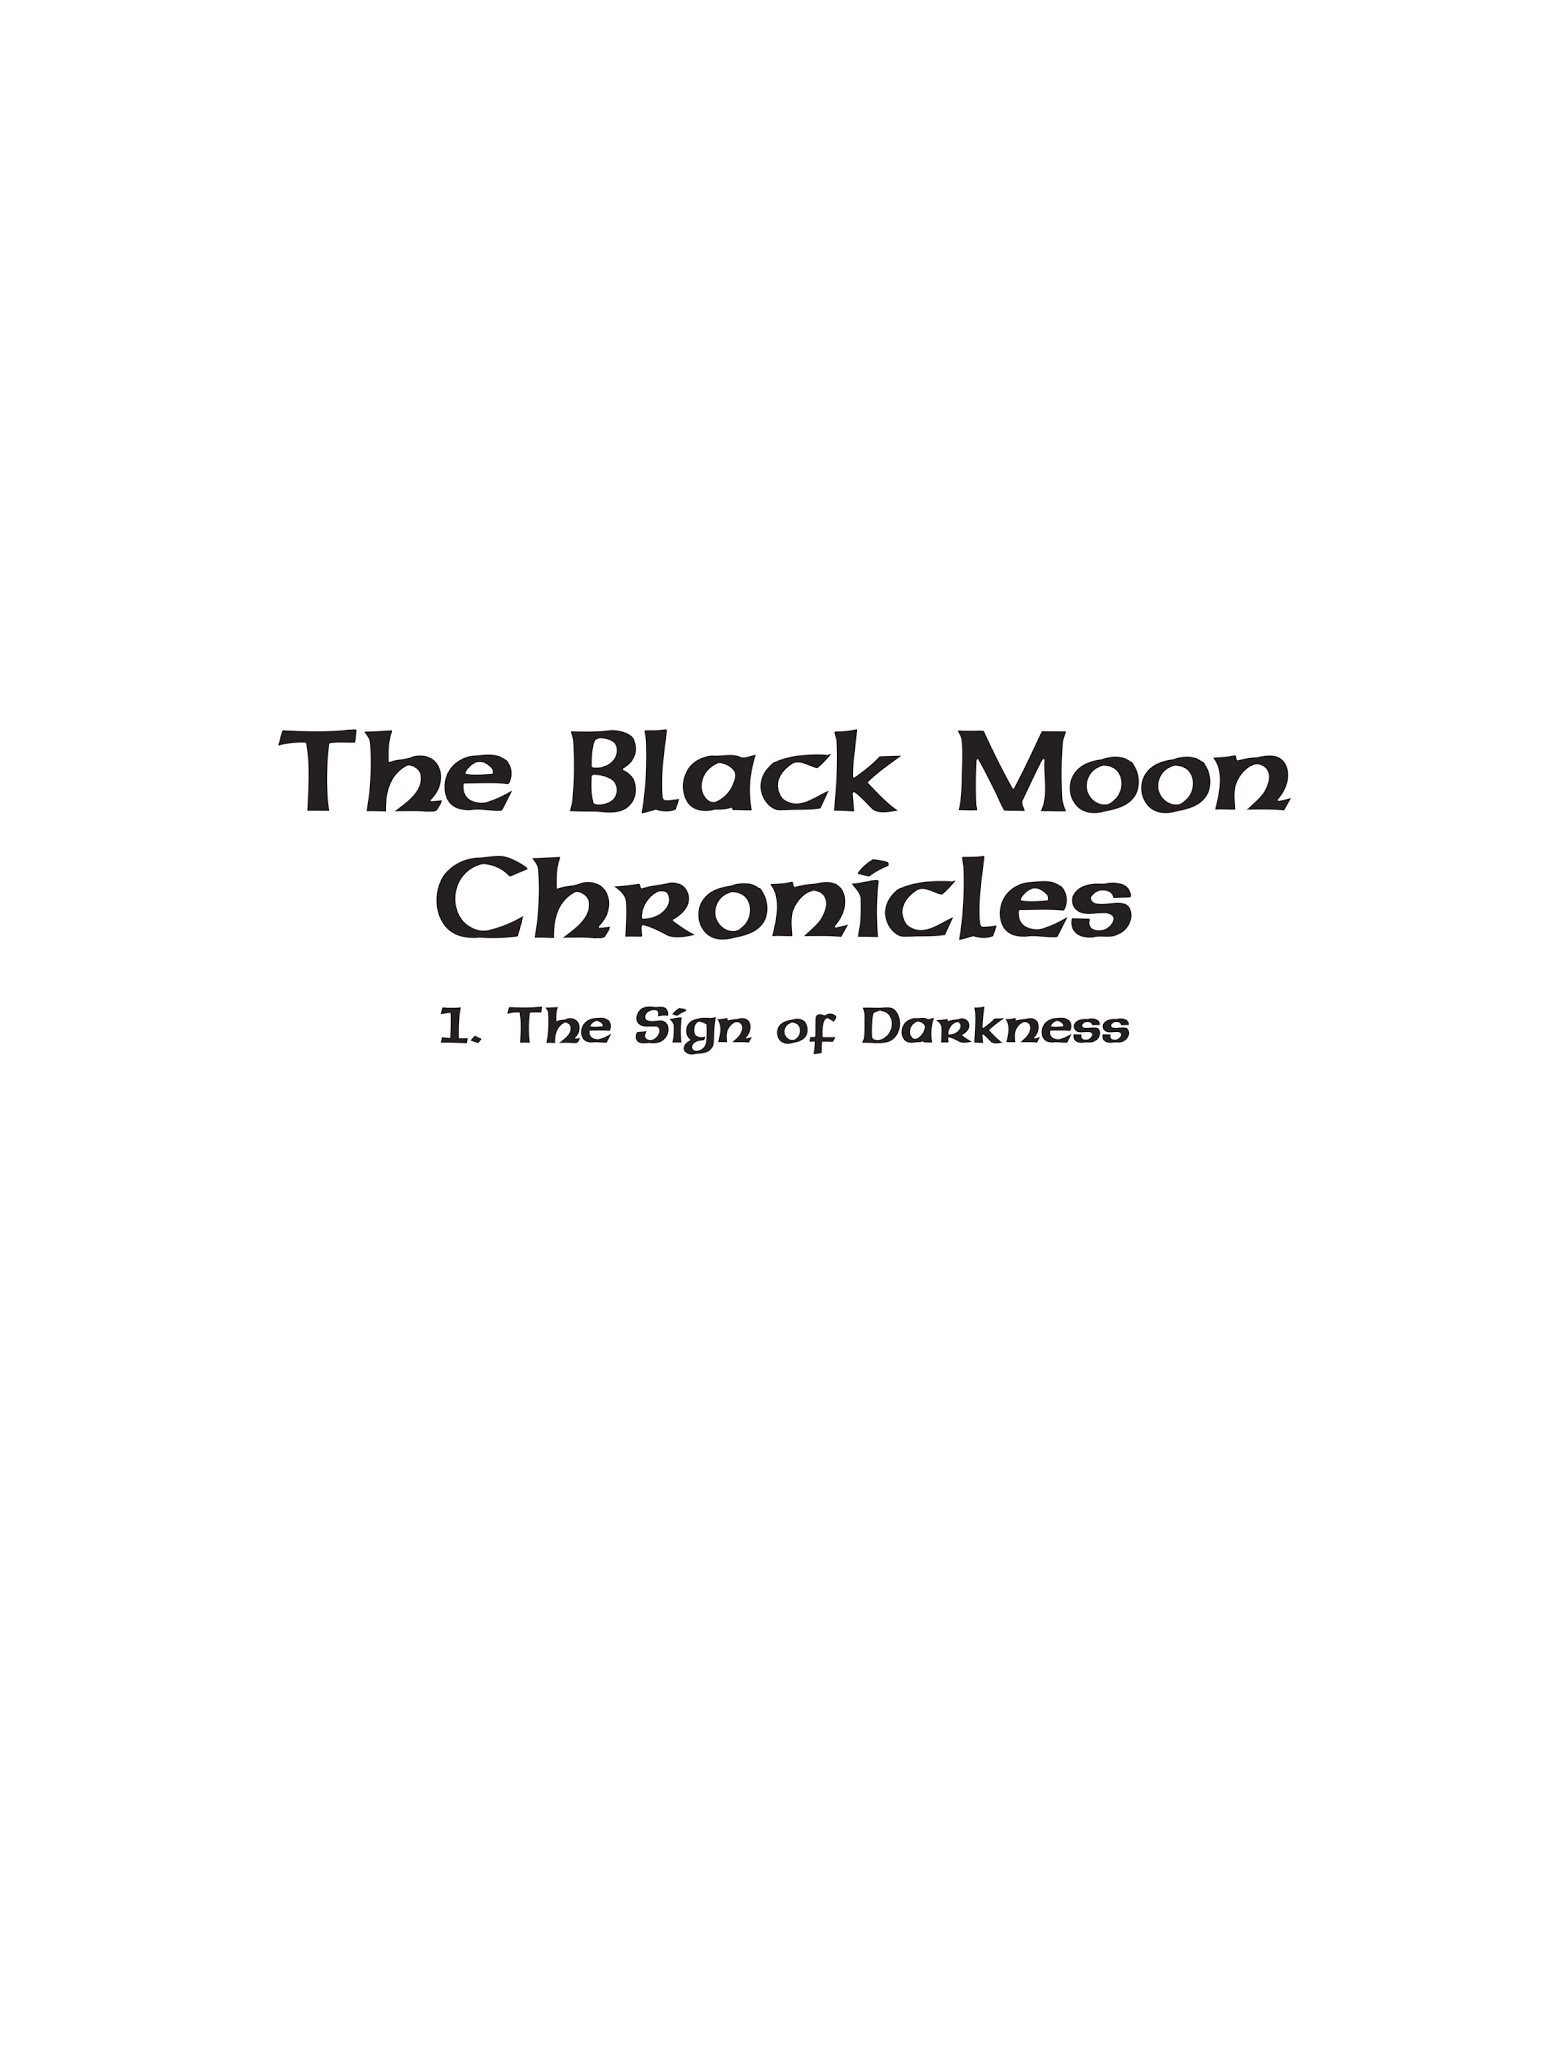 Read online The Black Moon Chronicles comic -  Issue #1 - 3